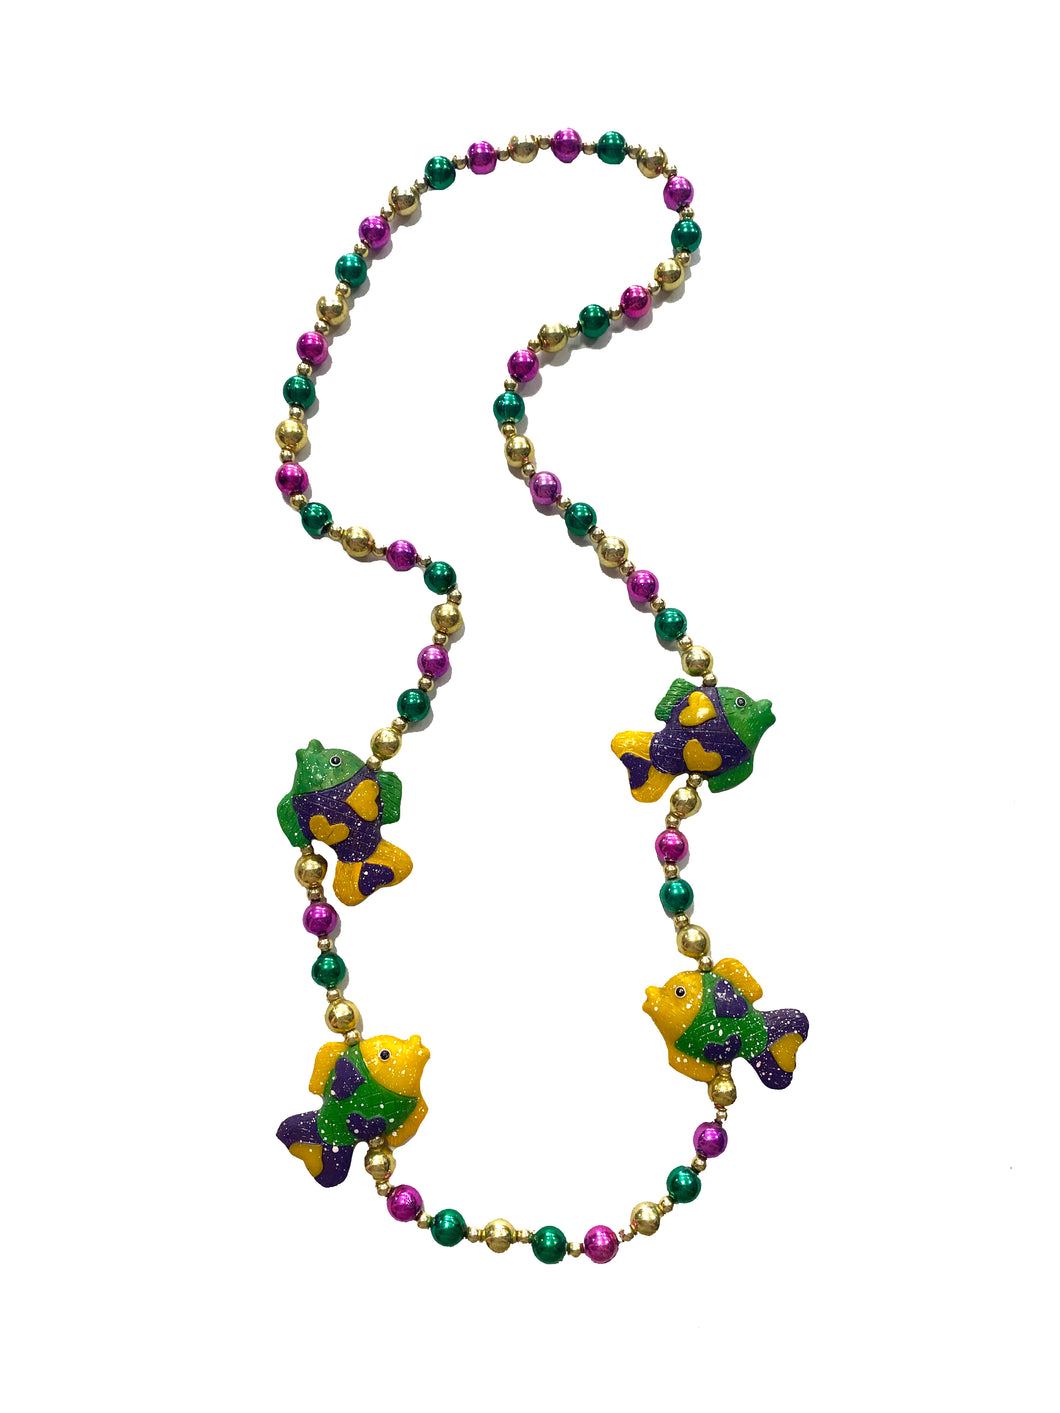 Mardi Gras Fish Medallions on Purple, Green, and Gold Specialty Bead